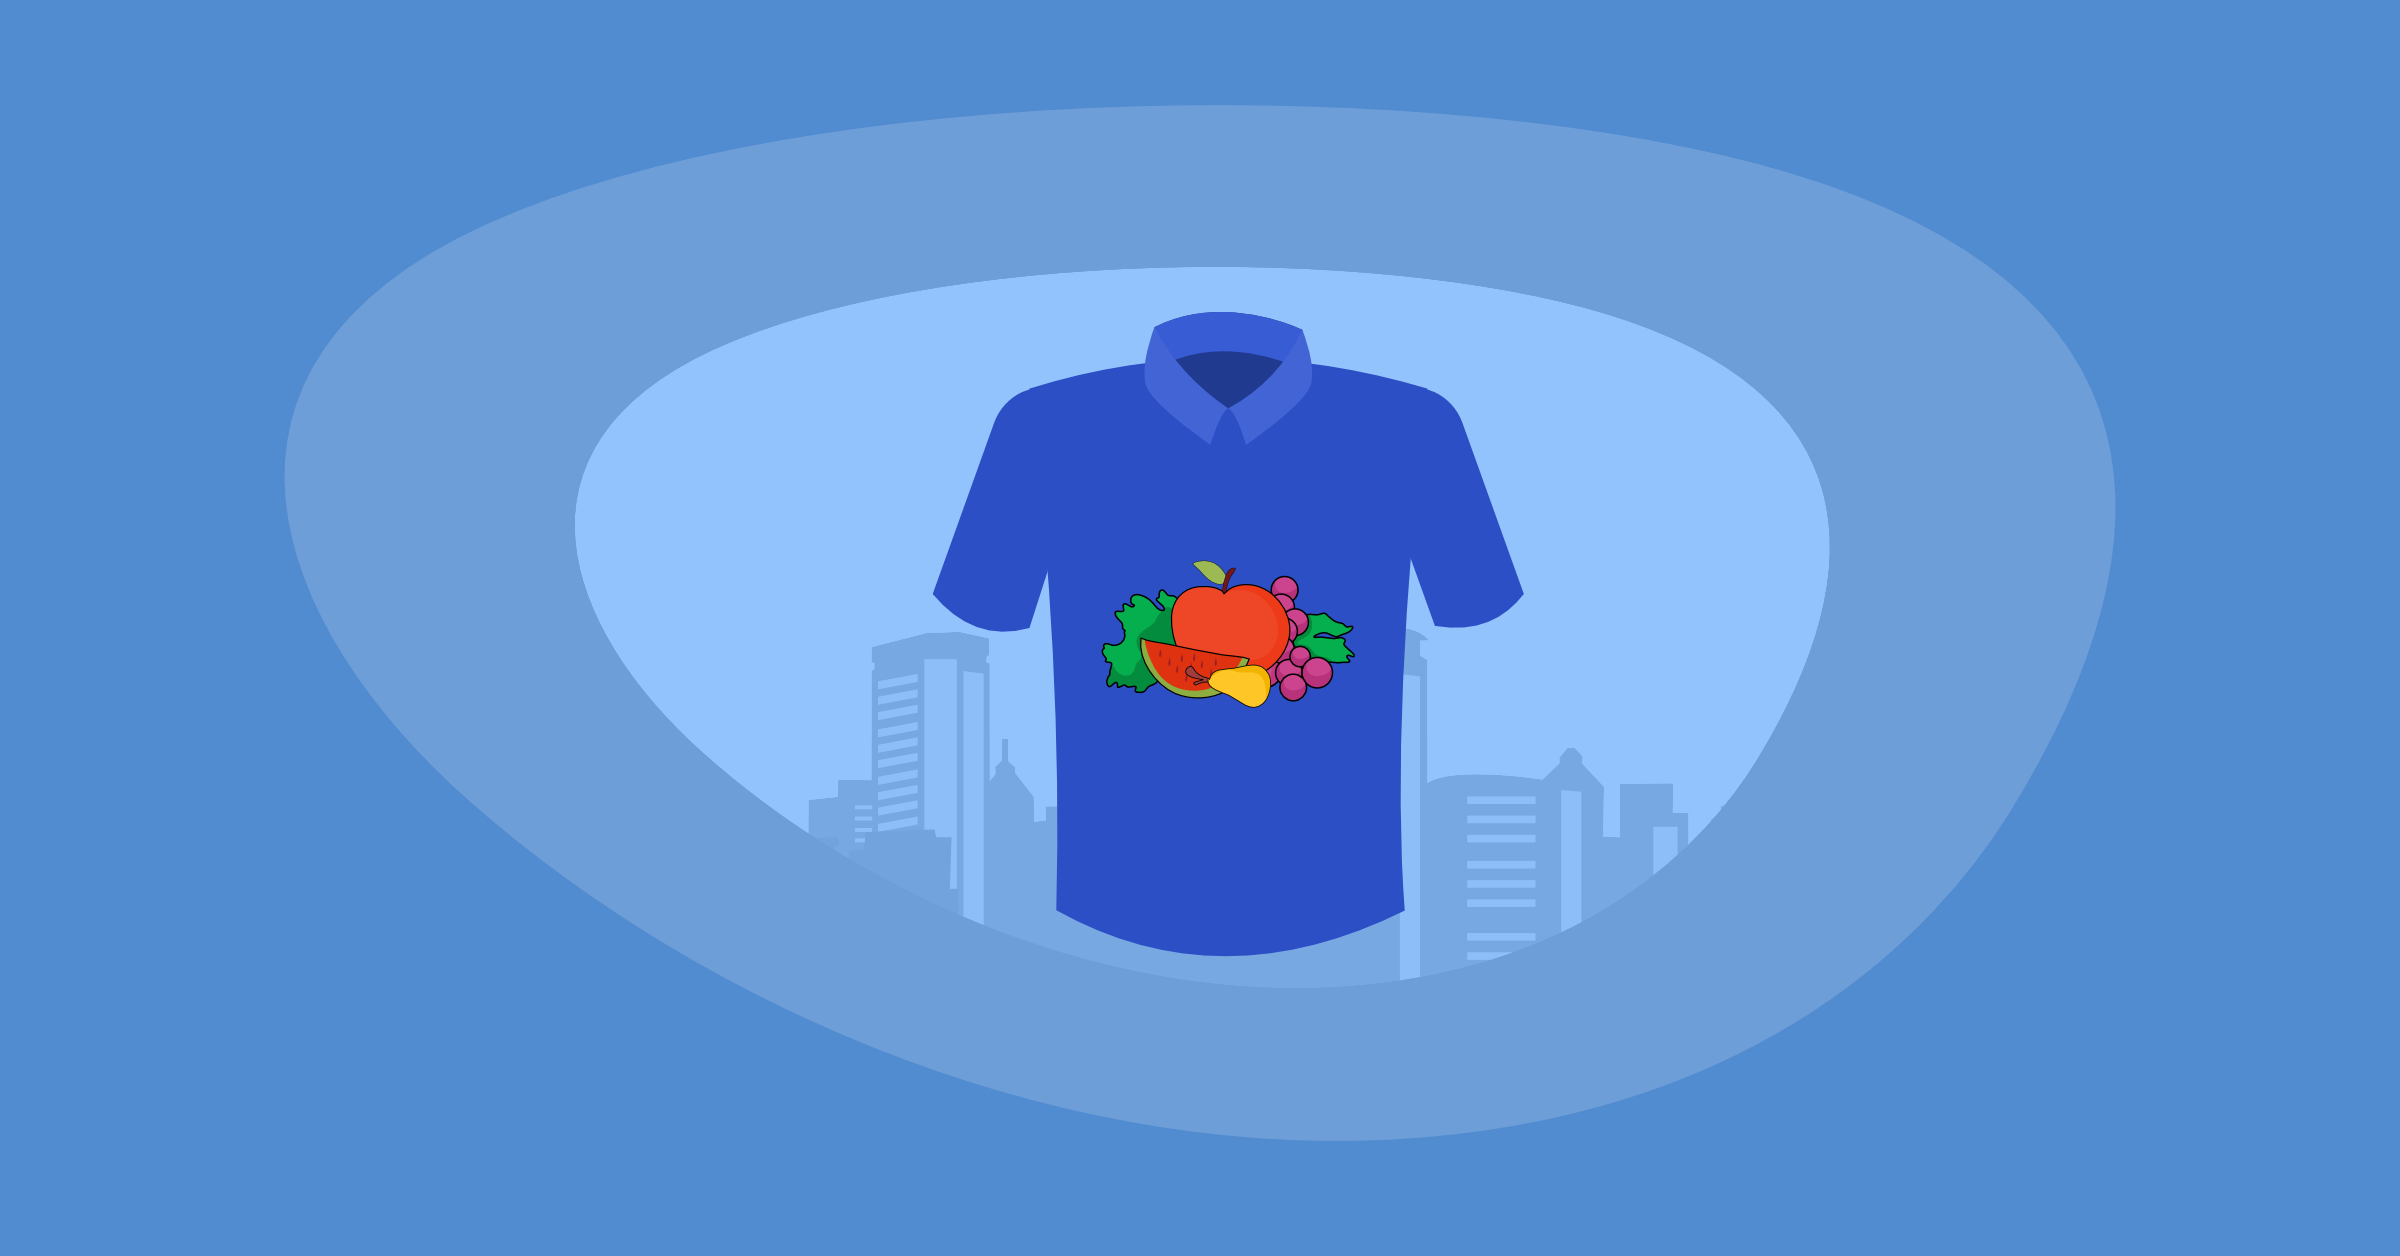 Illustration of a Fruit of the Loom t-shirt